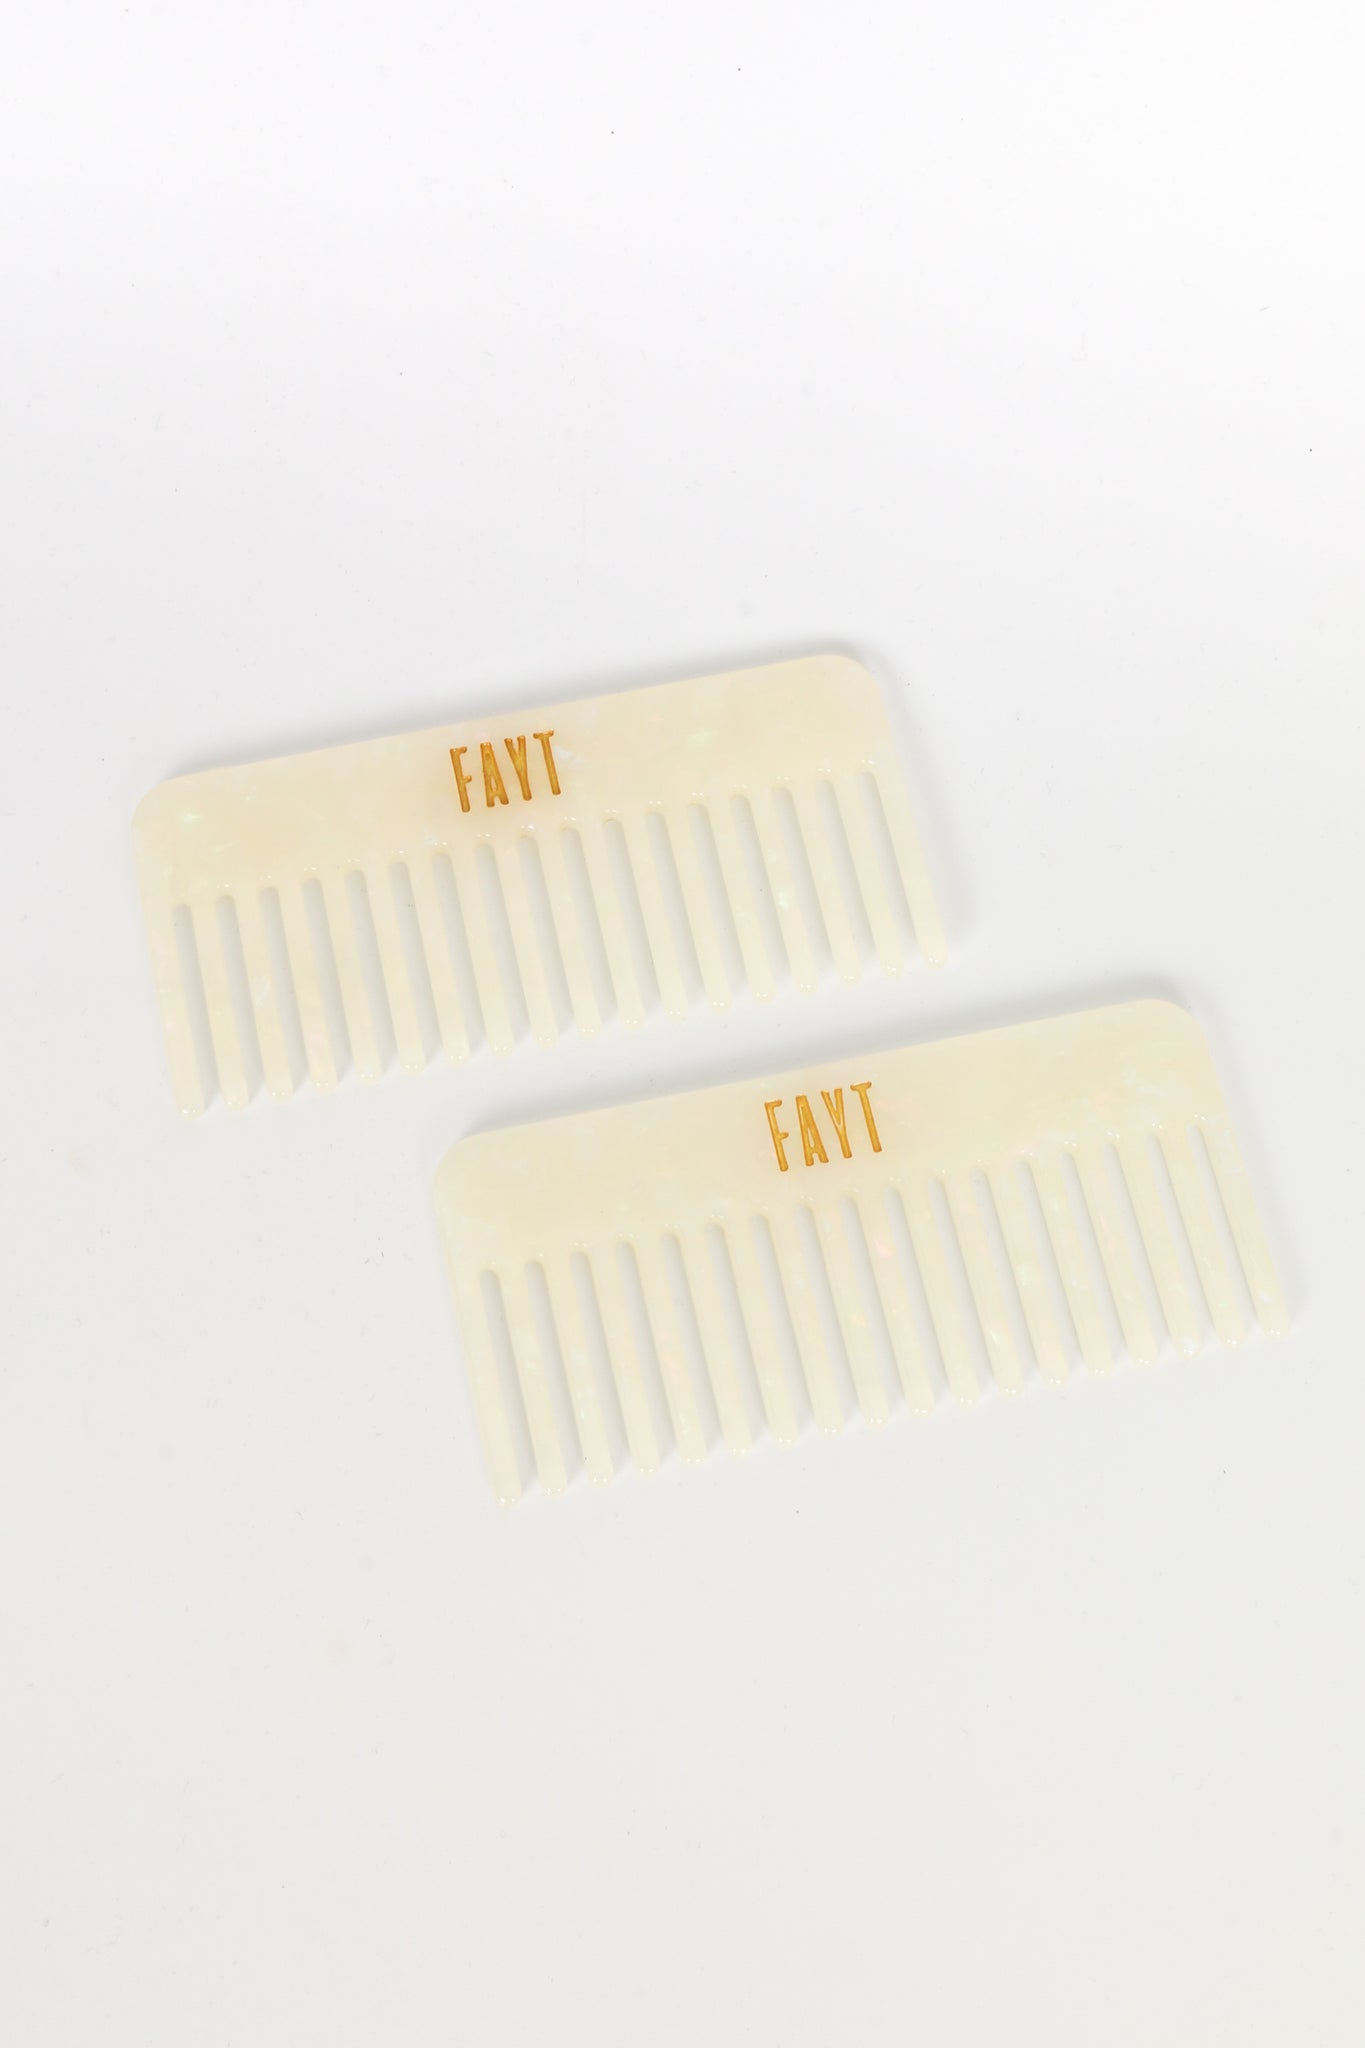 FAYT WIDE TOOTH COMB MULTI SHELL